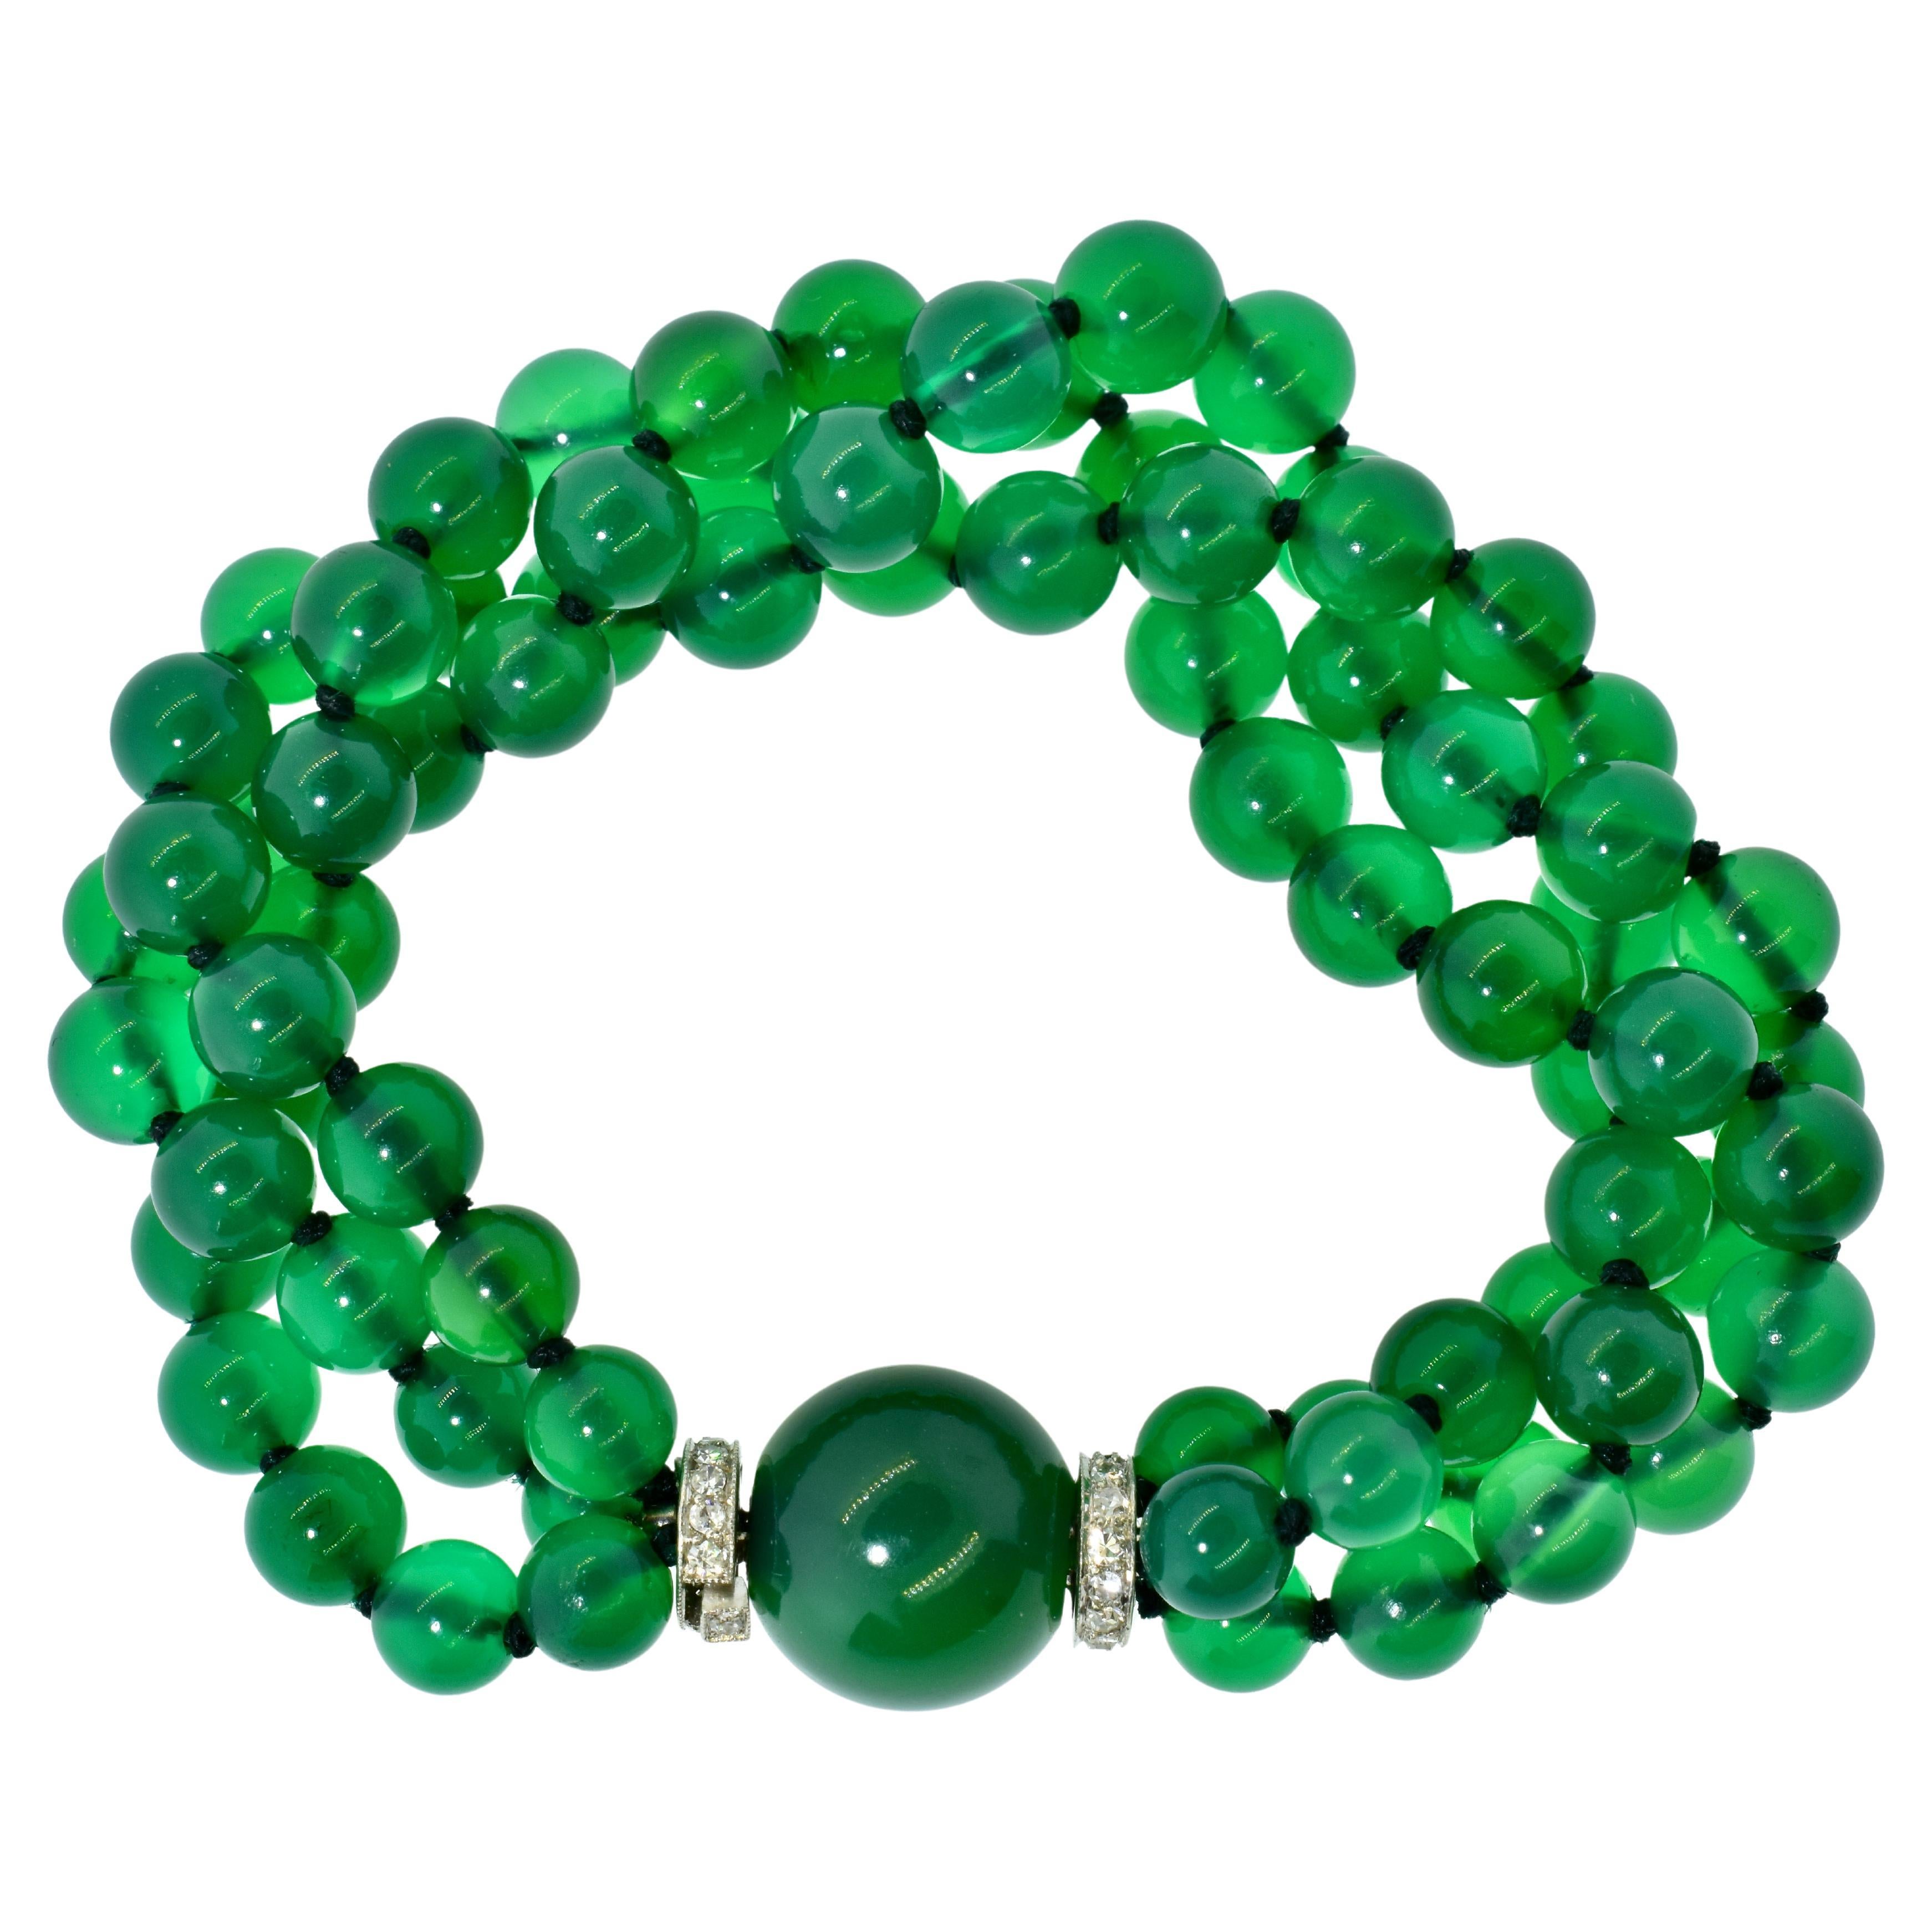 Art Deco bracelet composed of Chrysoprase  (also called green onyx), diamonds and platinum.  This colorful bracelet possesses 6 to 7 mm. green onyx beads terminating with a large 13.32 mm Chrysoprase bead and diamond rondels at the platinum clasp